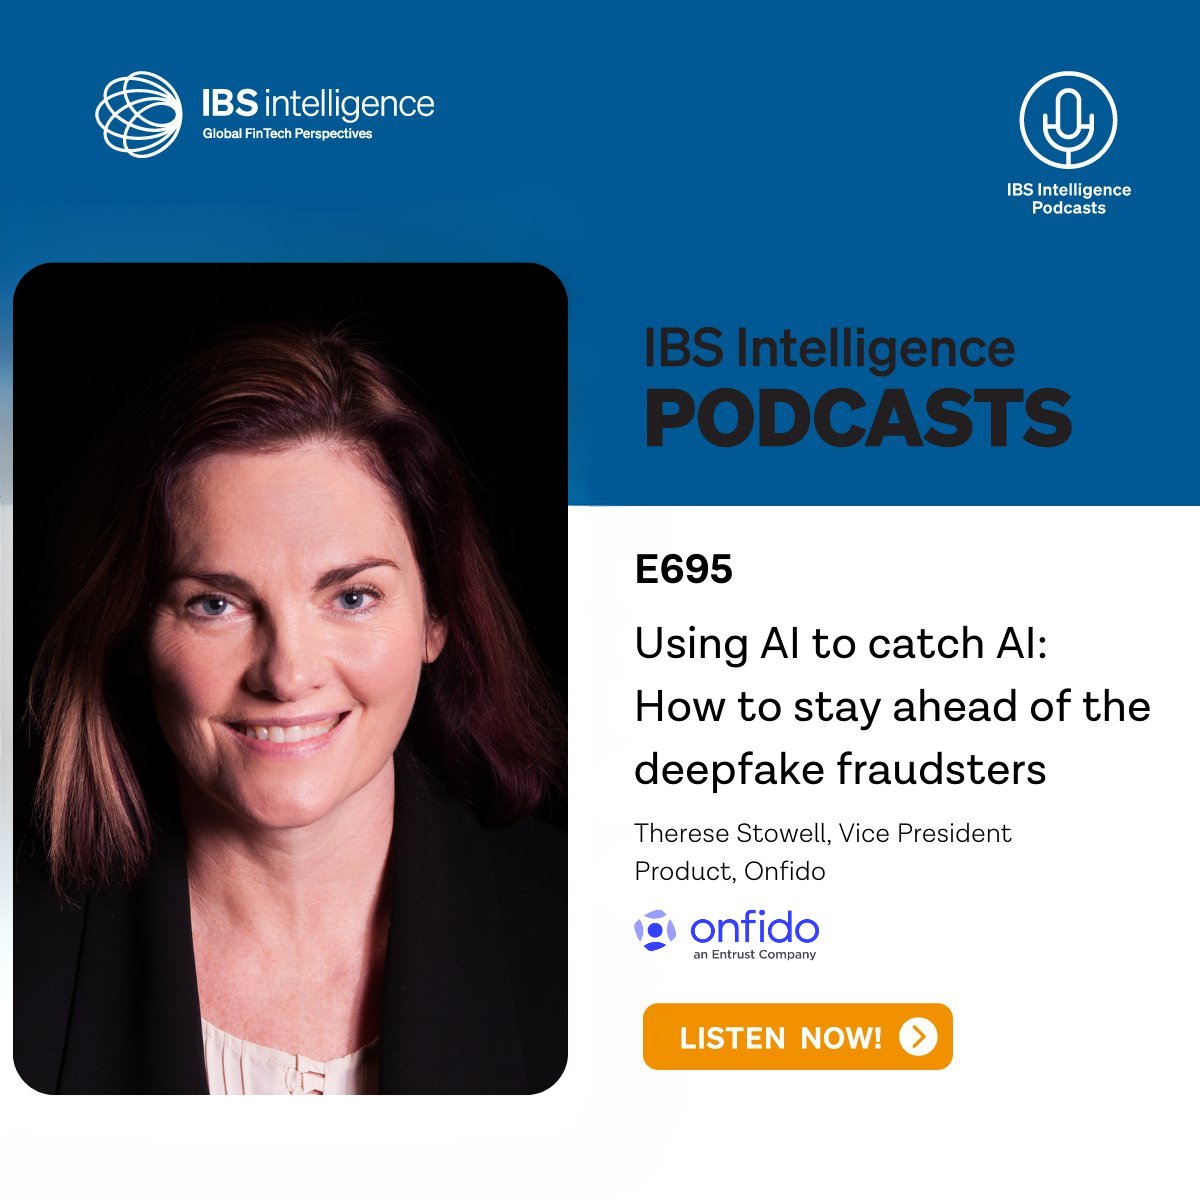 🎙️Curious about the role of AI in combating #deepfake fraud? Tune in to @IBSIntelligence podcast to hear the latest strategies and technologies being used. 🔗 bit.ly/4d3xRBJ #AI #TechTalk #FraudDetection